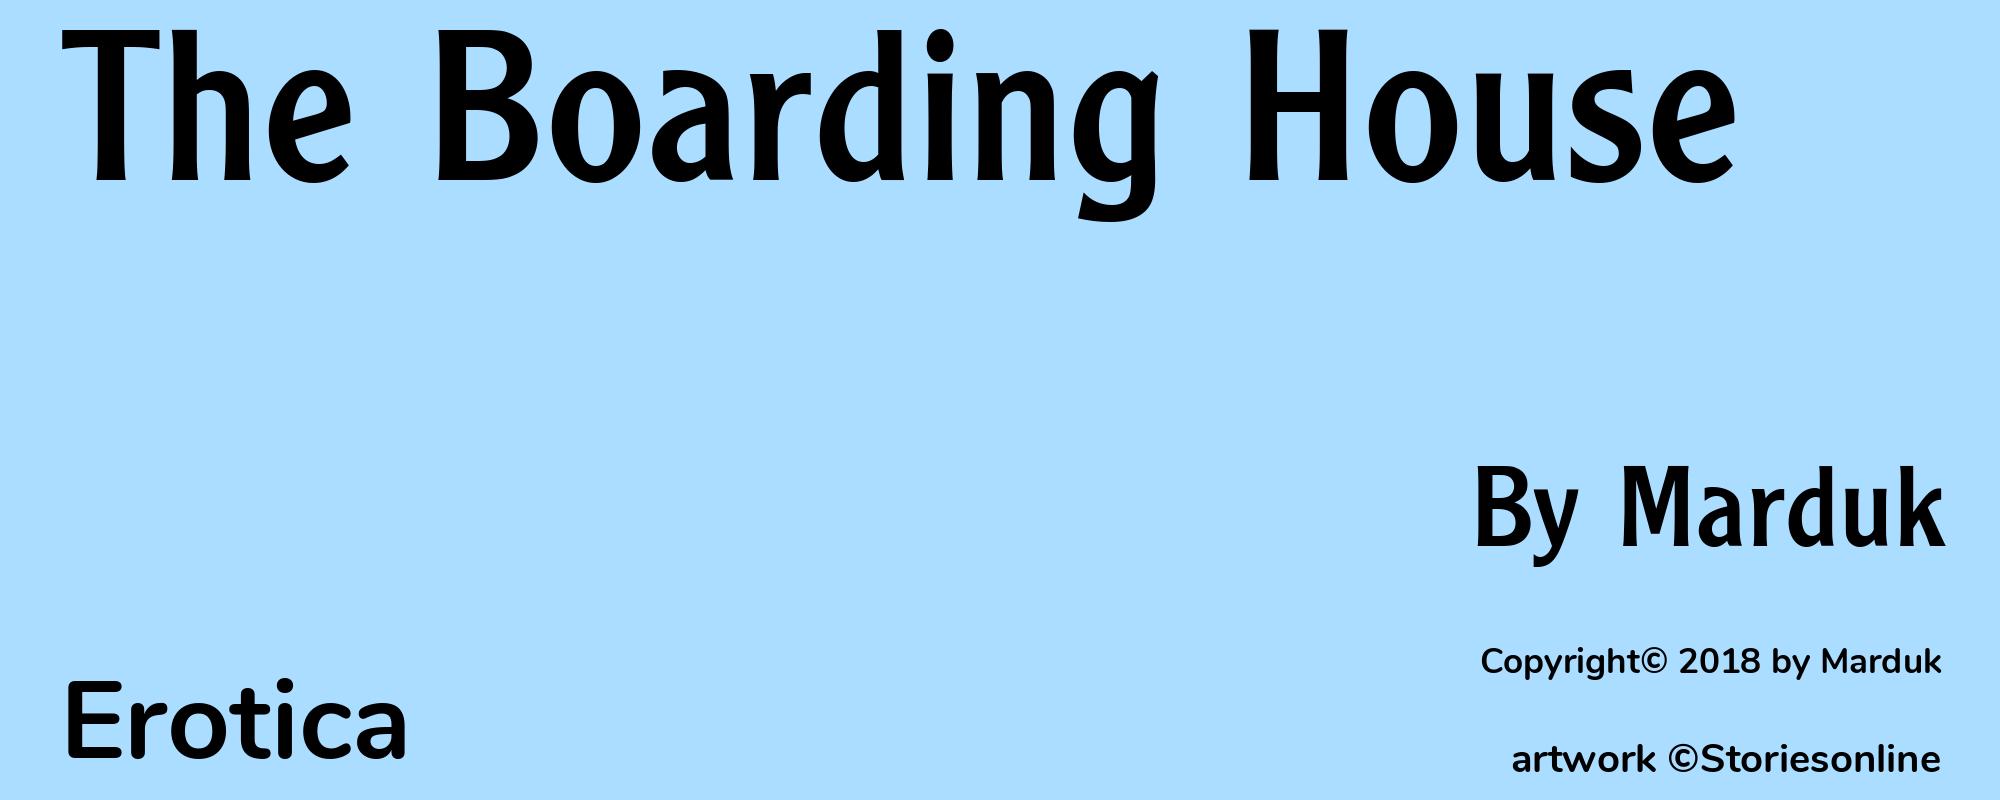 The Boarding House - Cover